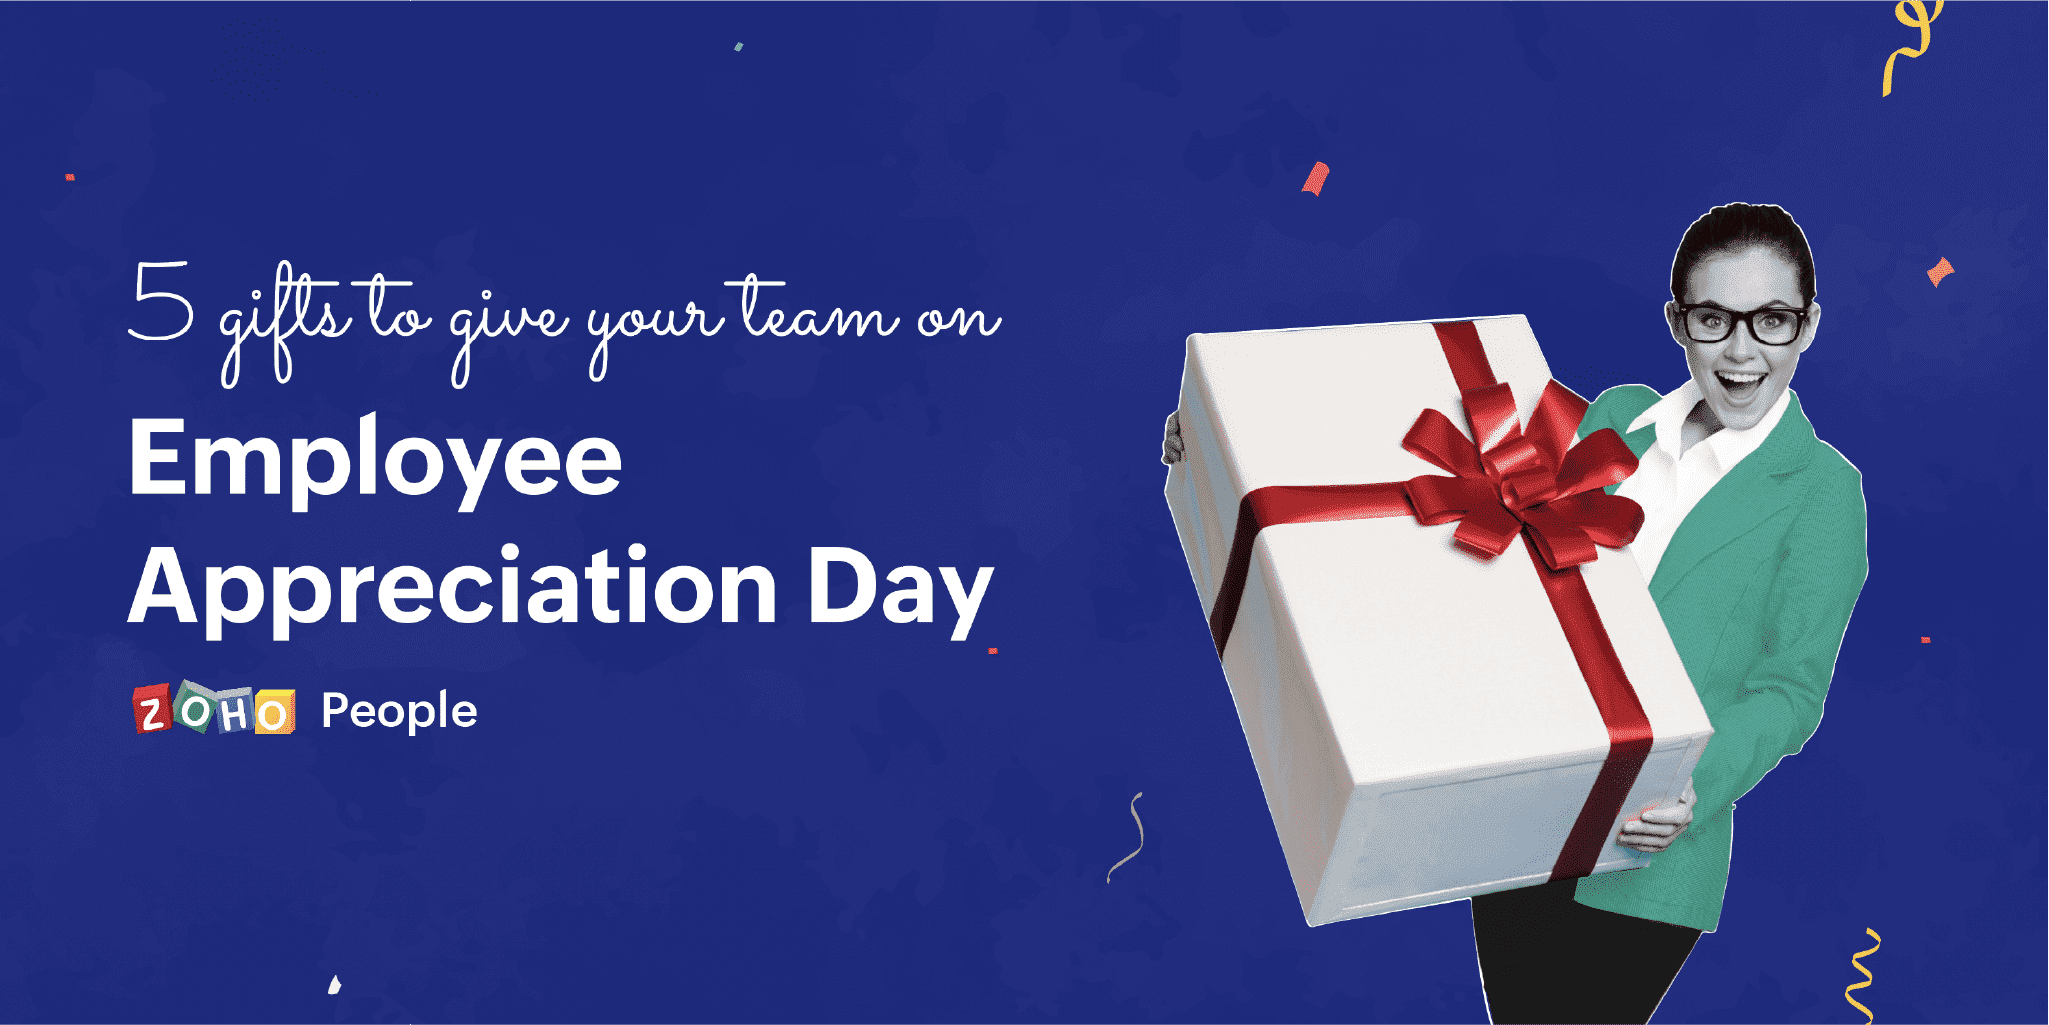 5 Gifts to give your team this Employee Appreciation Day